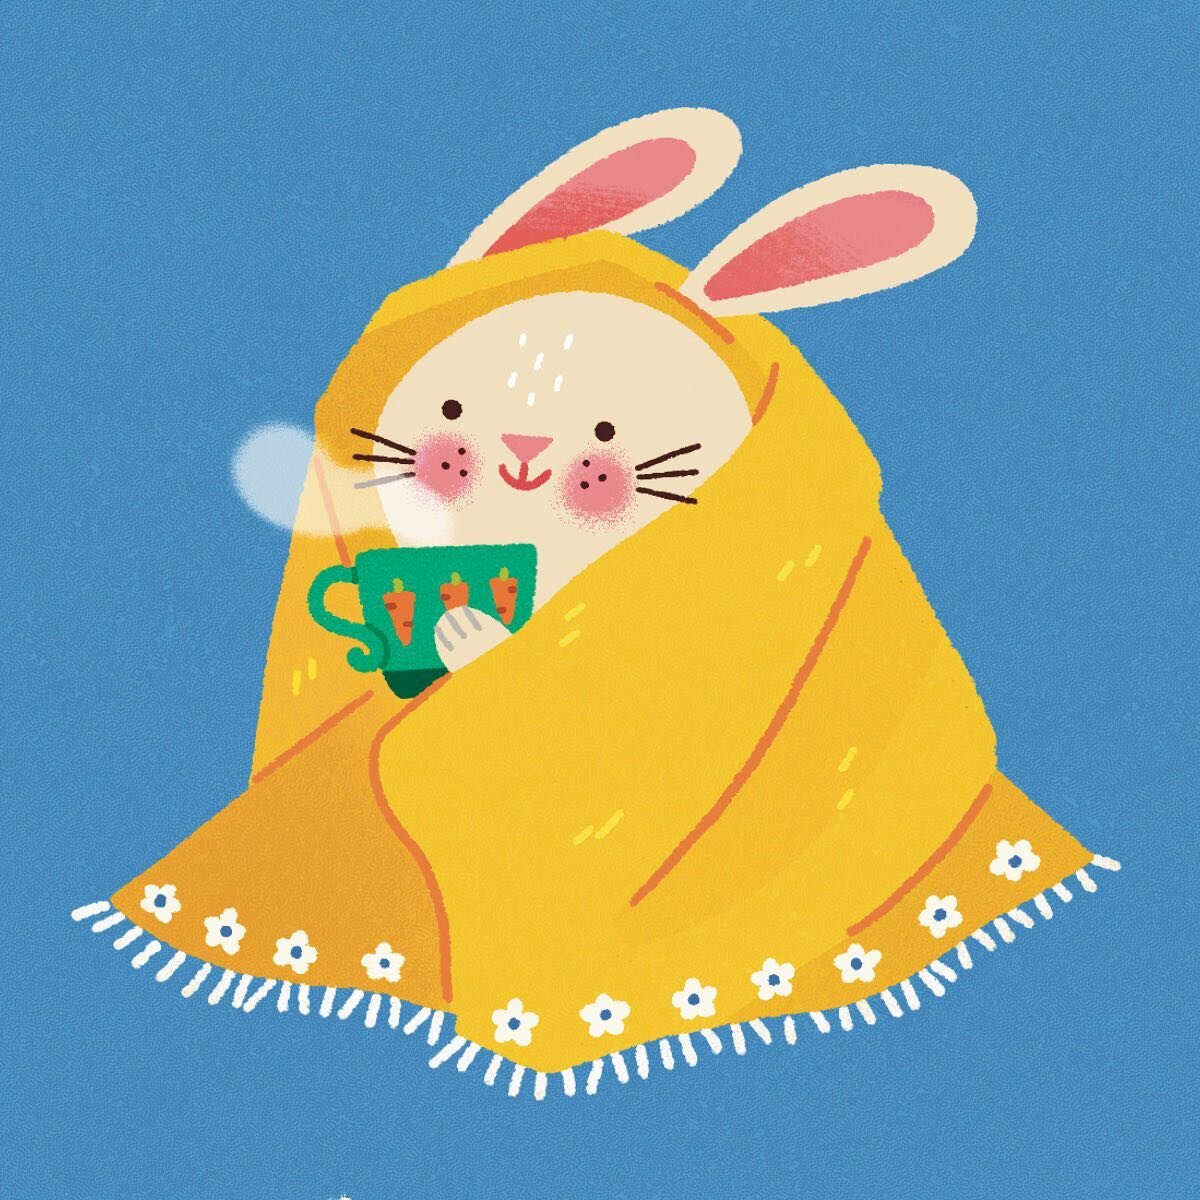 Have a great Easter everyone 🐰 
.
.
.
.
.
.
.
.
.
.
.
.
#easter #easterillustration #easterillustrations #eastersunday #easterart #bunny #bunnyillustration #bunnyillustrations #childrens #childrensillustrations #childrensillustratorsart #childrensil